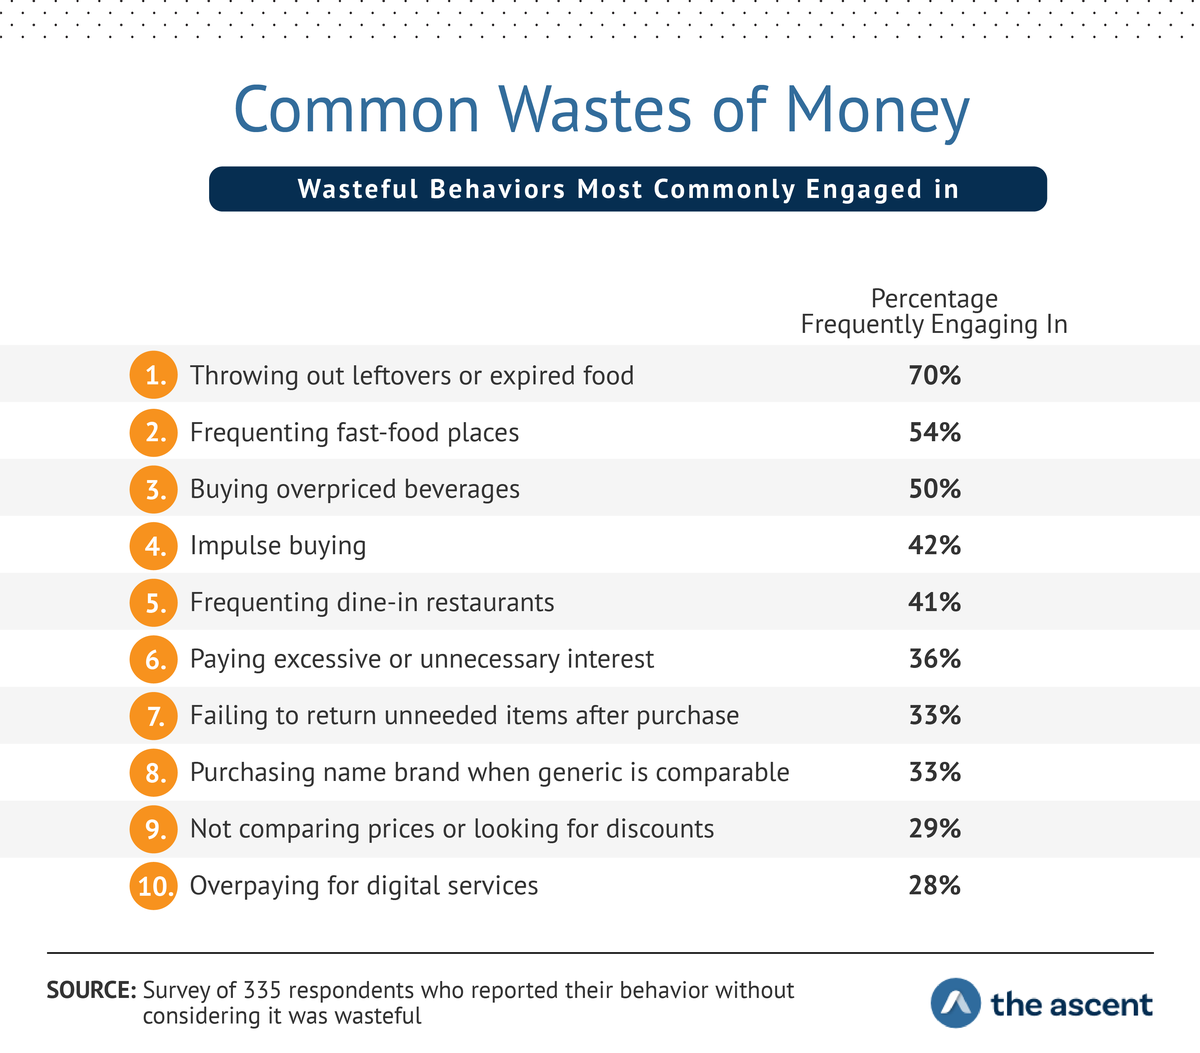 Common Wastes of Money: Wasteful Behaviors Mostly Commonly Engaged In...Throwing out leftovers or expired foods	70% Frequenting fast food places	54% Buying overpriced beverages	50% Impulse buying	42% Frequenting dine-in restaurants	41% Paying excessive or unnecessary interest	36% Failing to return unneeded items after purchase	33% Purchasing name brand when a generic is equally good	33% Not comparing prices or looking for discounts	29% Overpaying for digital services	28%